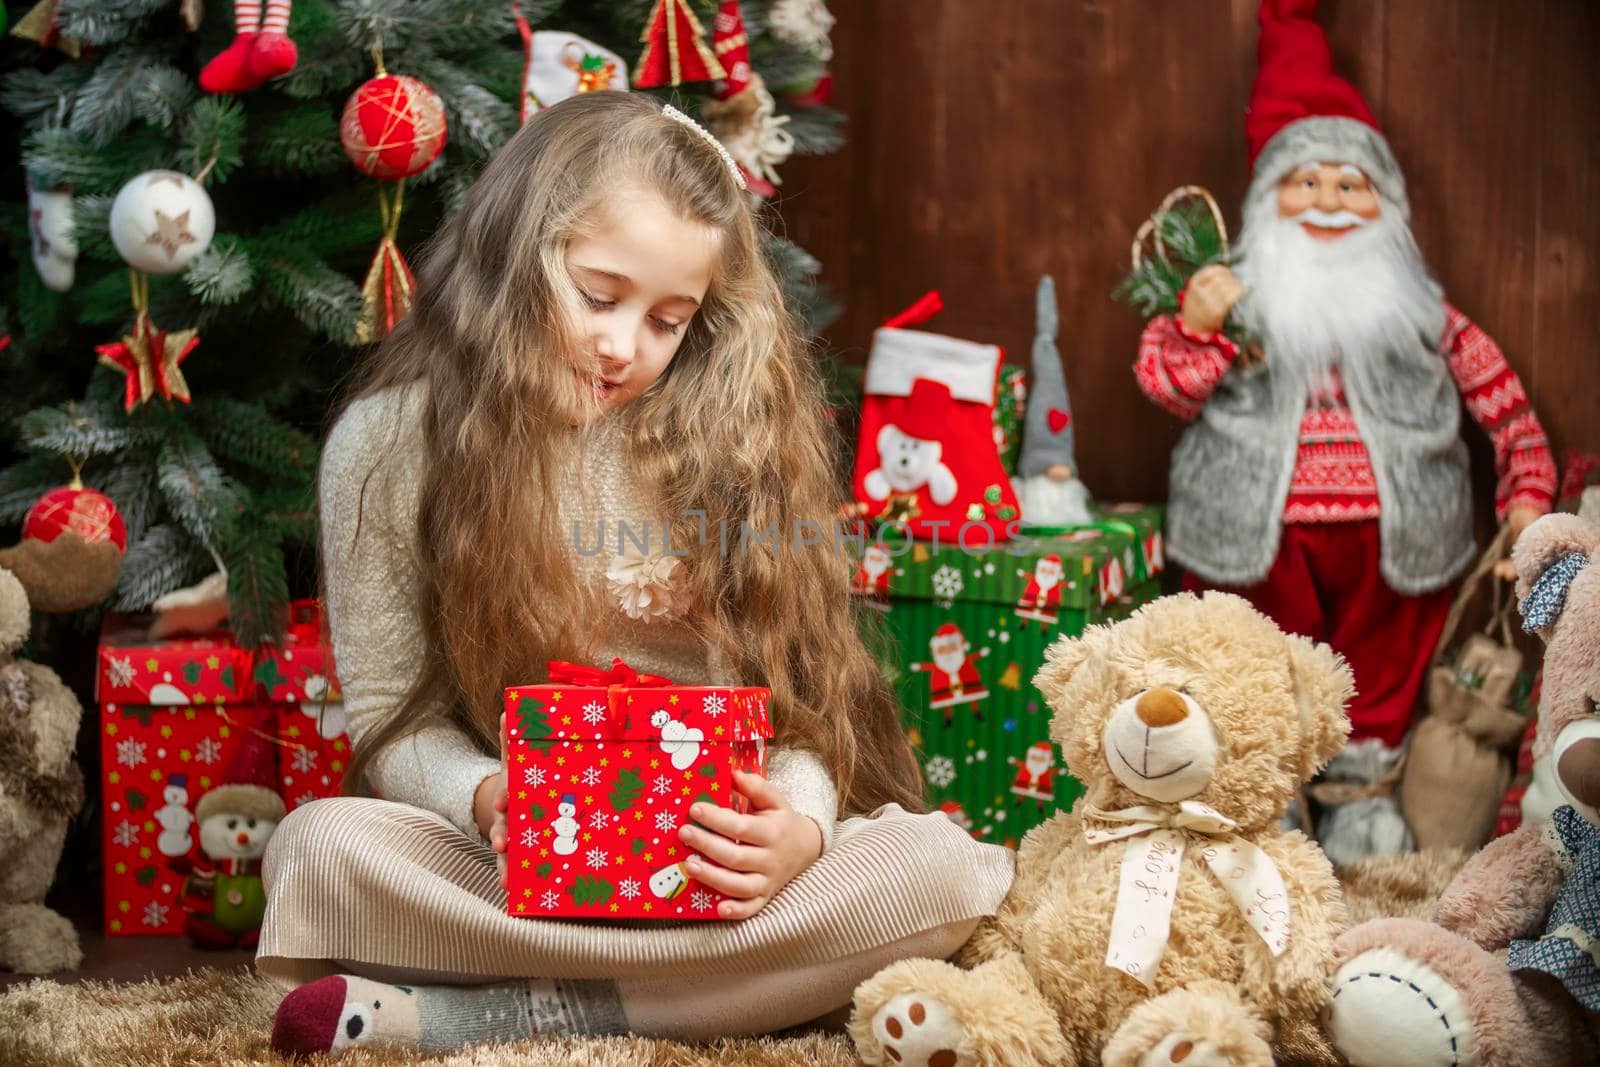 Girl with a gift box in her hands on the background of a christmas tree